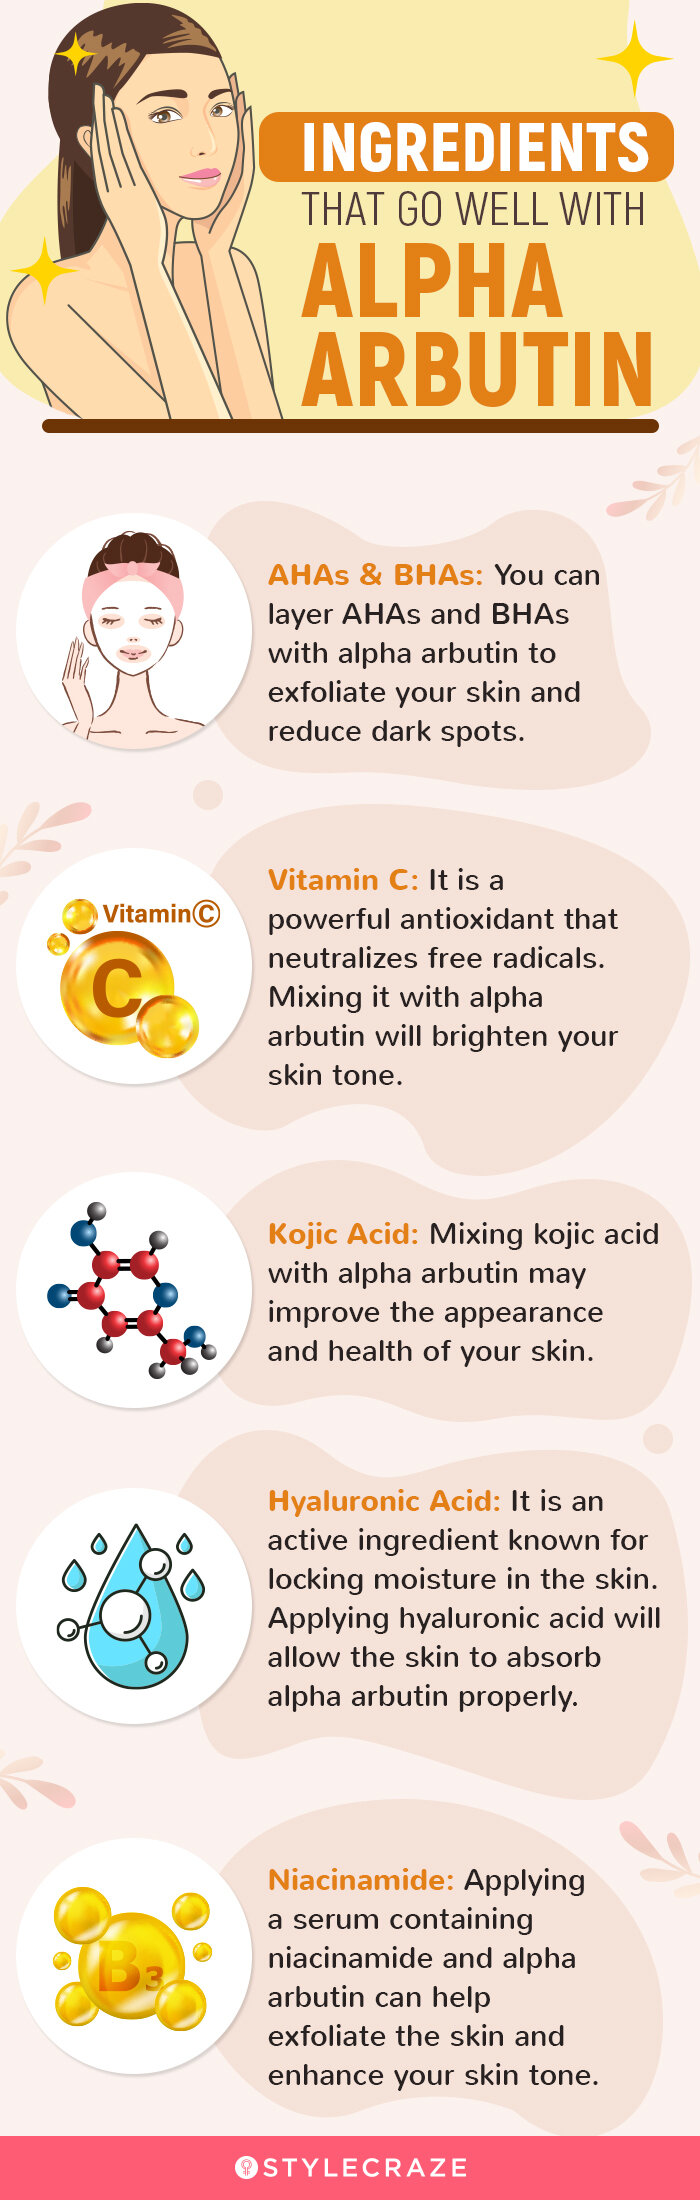 Alpha Arbutin For Skin: Benefits, How To Use, And Side Effects  